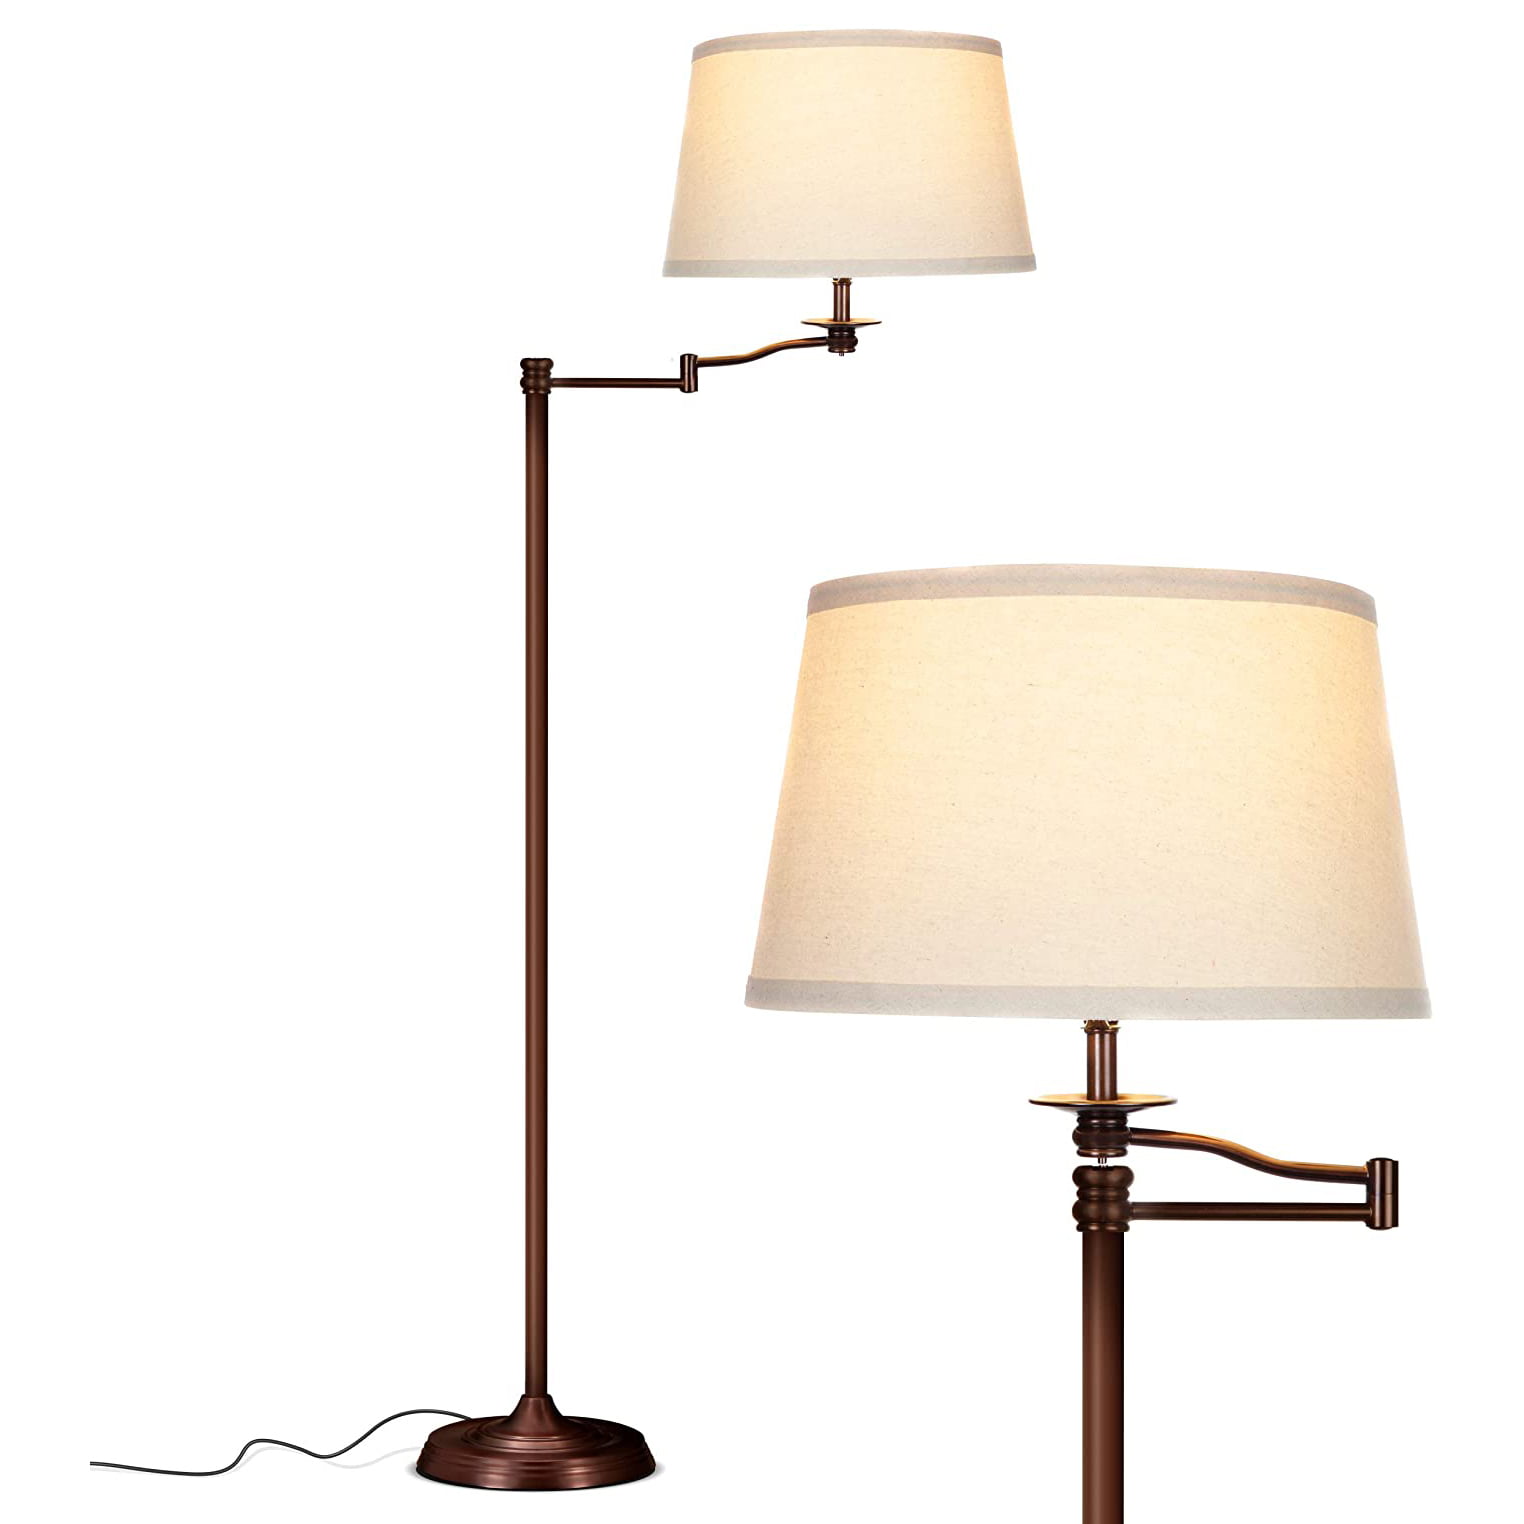 Brightech Caden Modern Industrial Style, Are Floor Lamps Still In Style